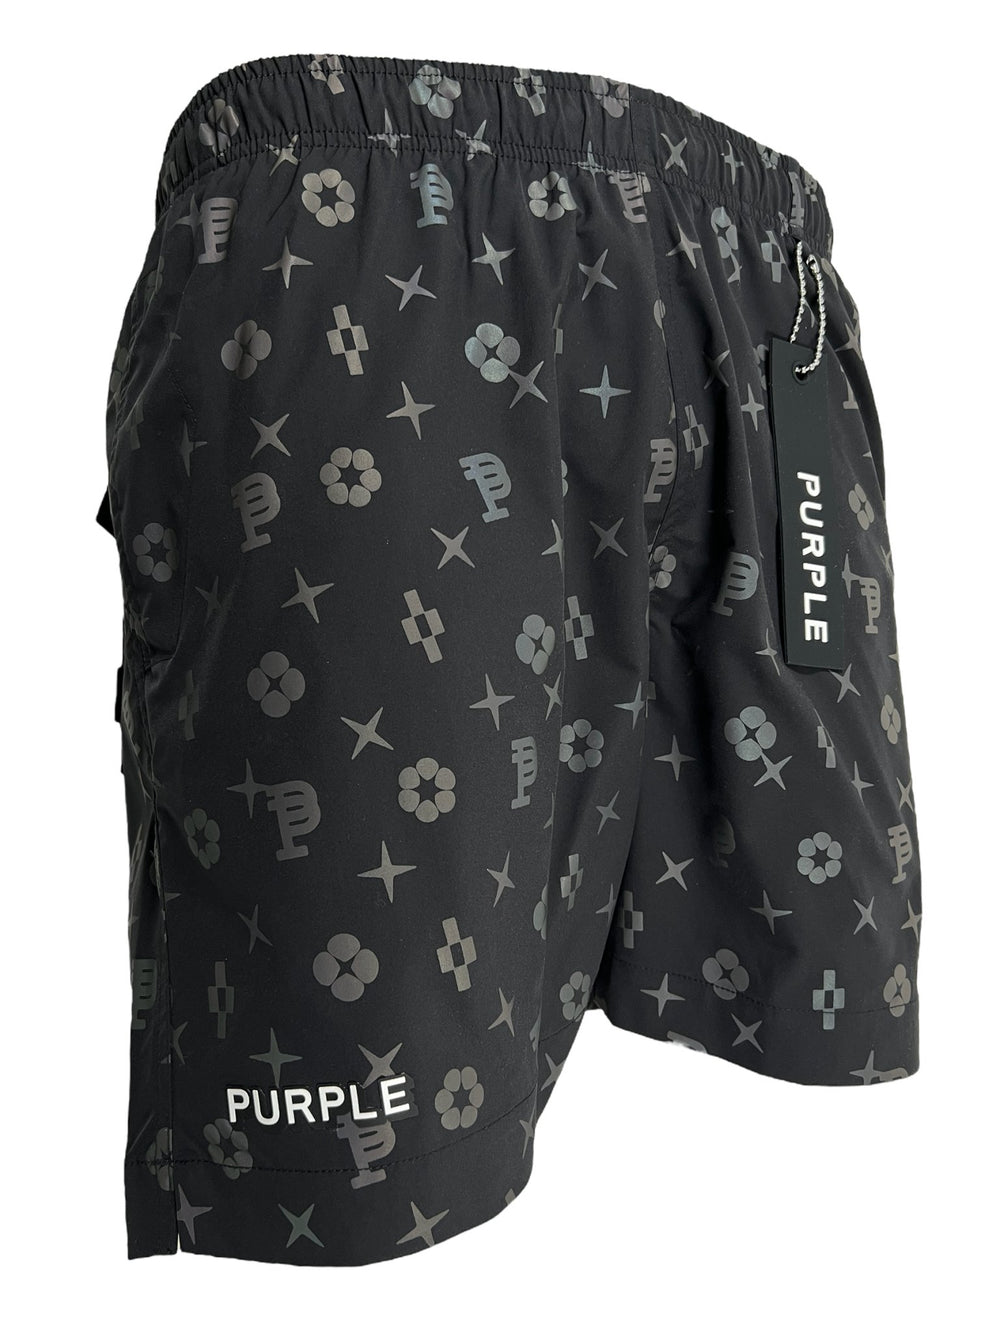 Black shorts with a vibrant print featuring various geometric shapes and symbols, including flowers and the letter "P". The word "PURPLE" is printed on the bottom of the left leg, showcasing a unique design by PURPLE BRAND PURPLE BRAND P504-PBBH ALL ROUND SHORT AOP.